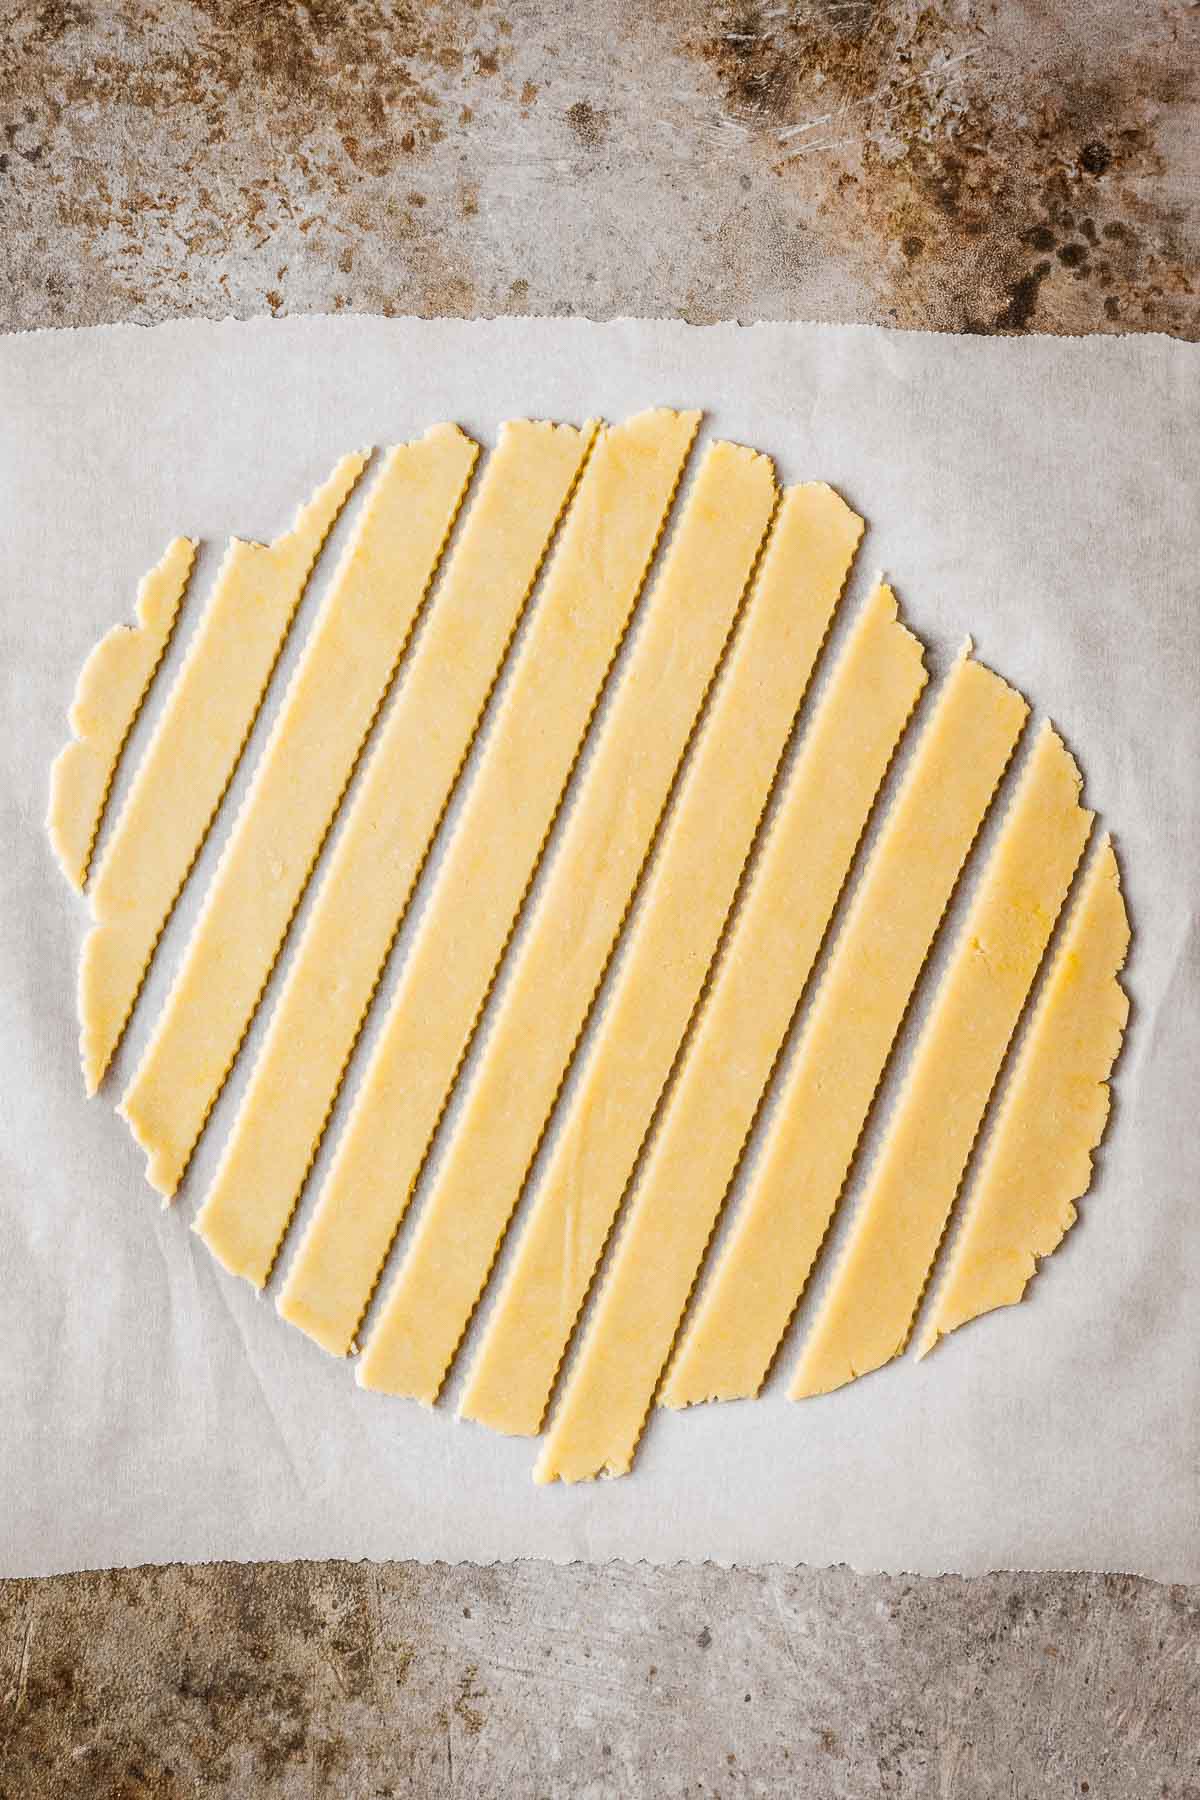 Fluted strips of lattice dough on a sheet of parchment paper.